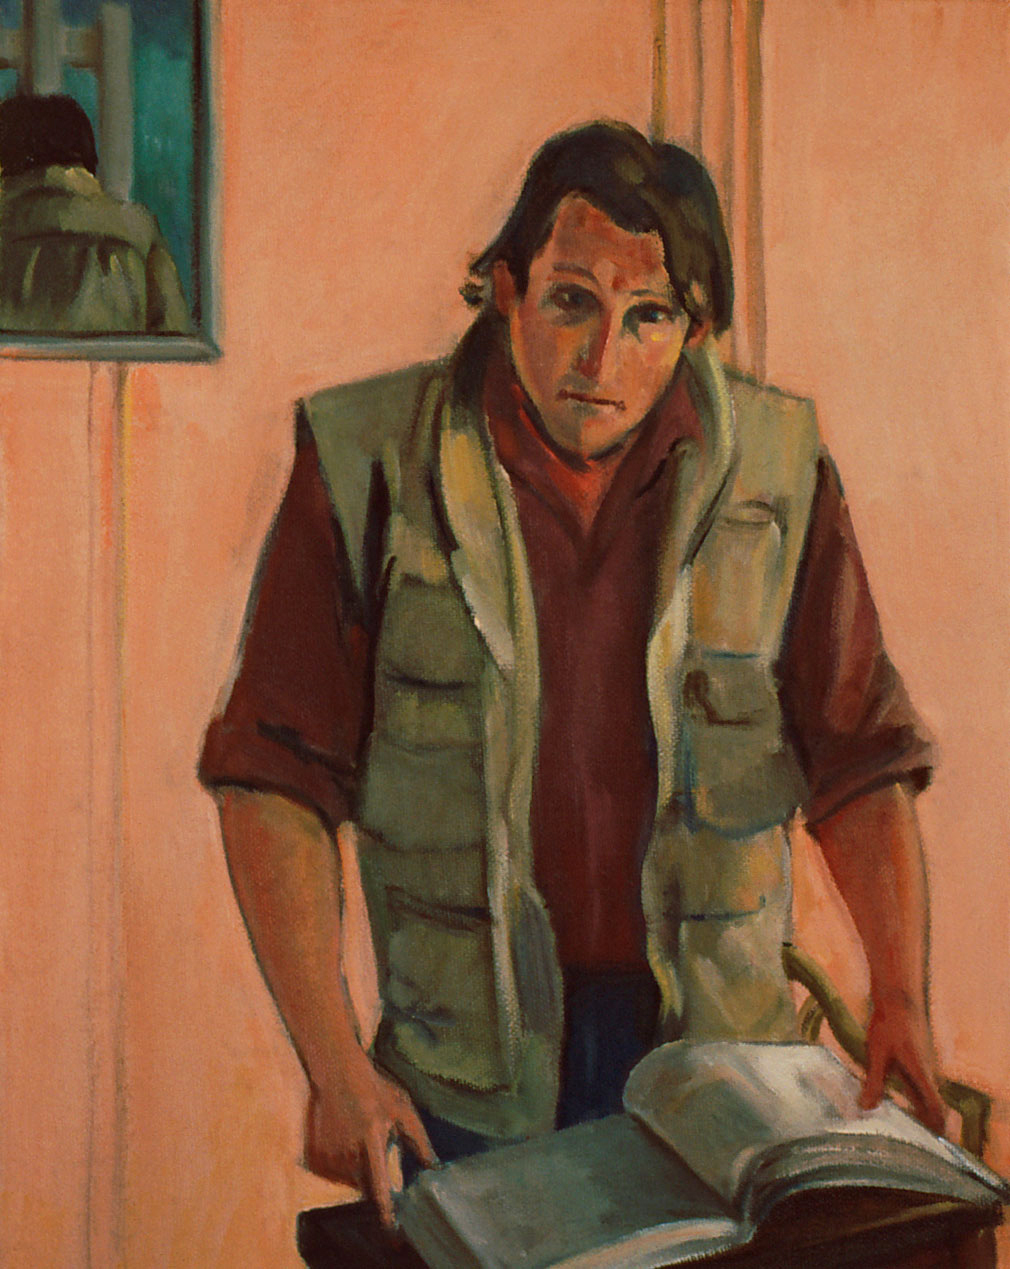 Portrait of Michael Wingo by Ethel Fisher, 1988, oil on canvas, 14 x 11 inches, twentieth century figure painting.